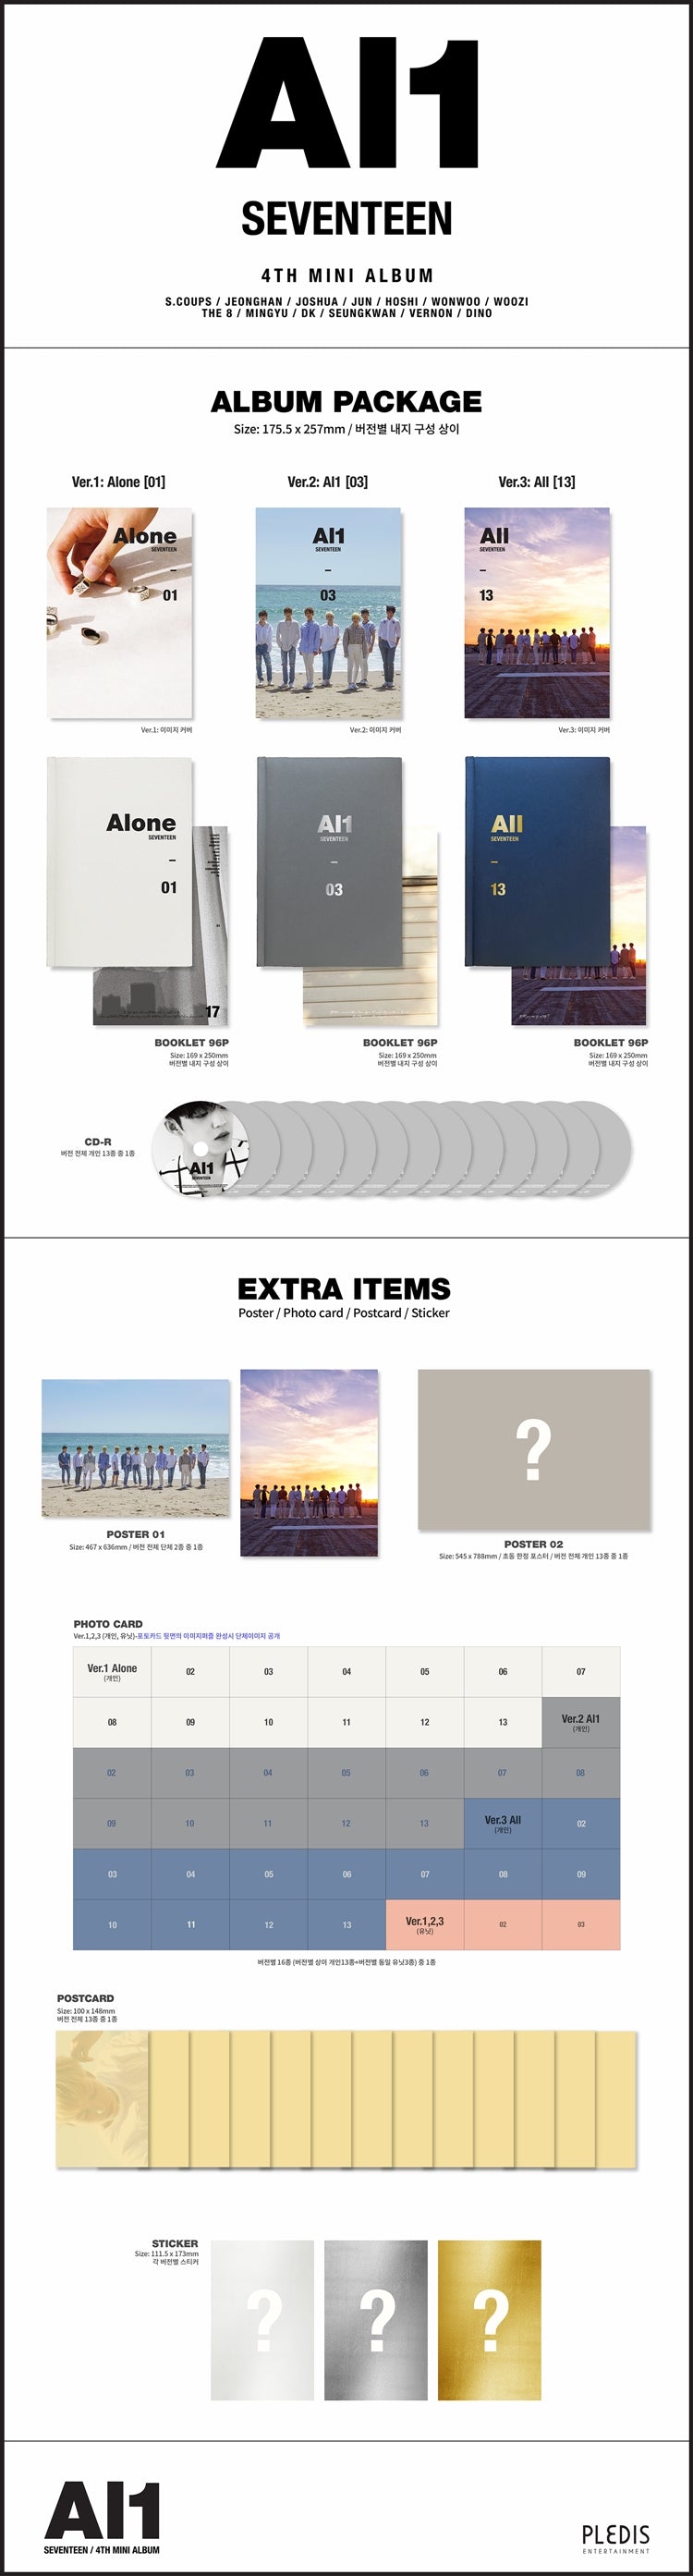 1 CD
1 Booklet (96 pages)
1 Photo Card (random out of 16 typees)
1 Postcard (random out fo 13 types)
1 Sticker